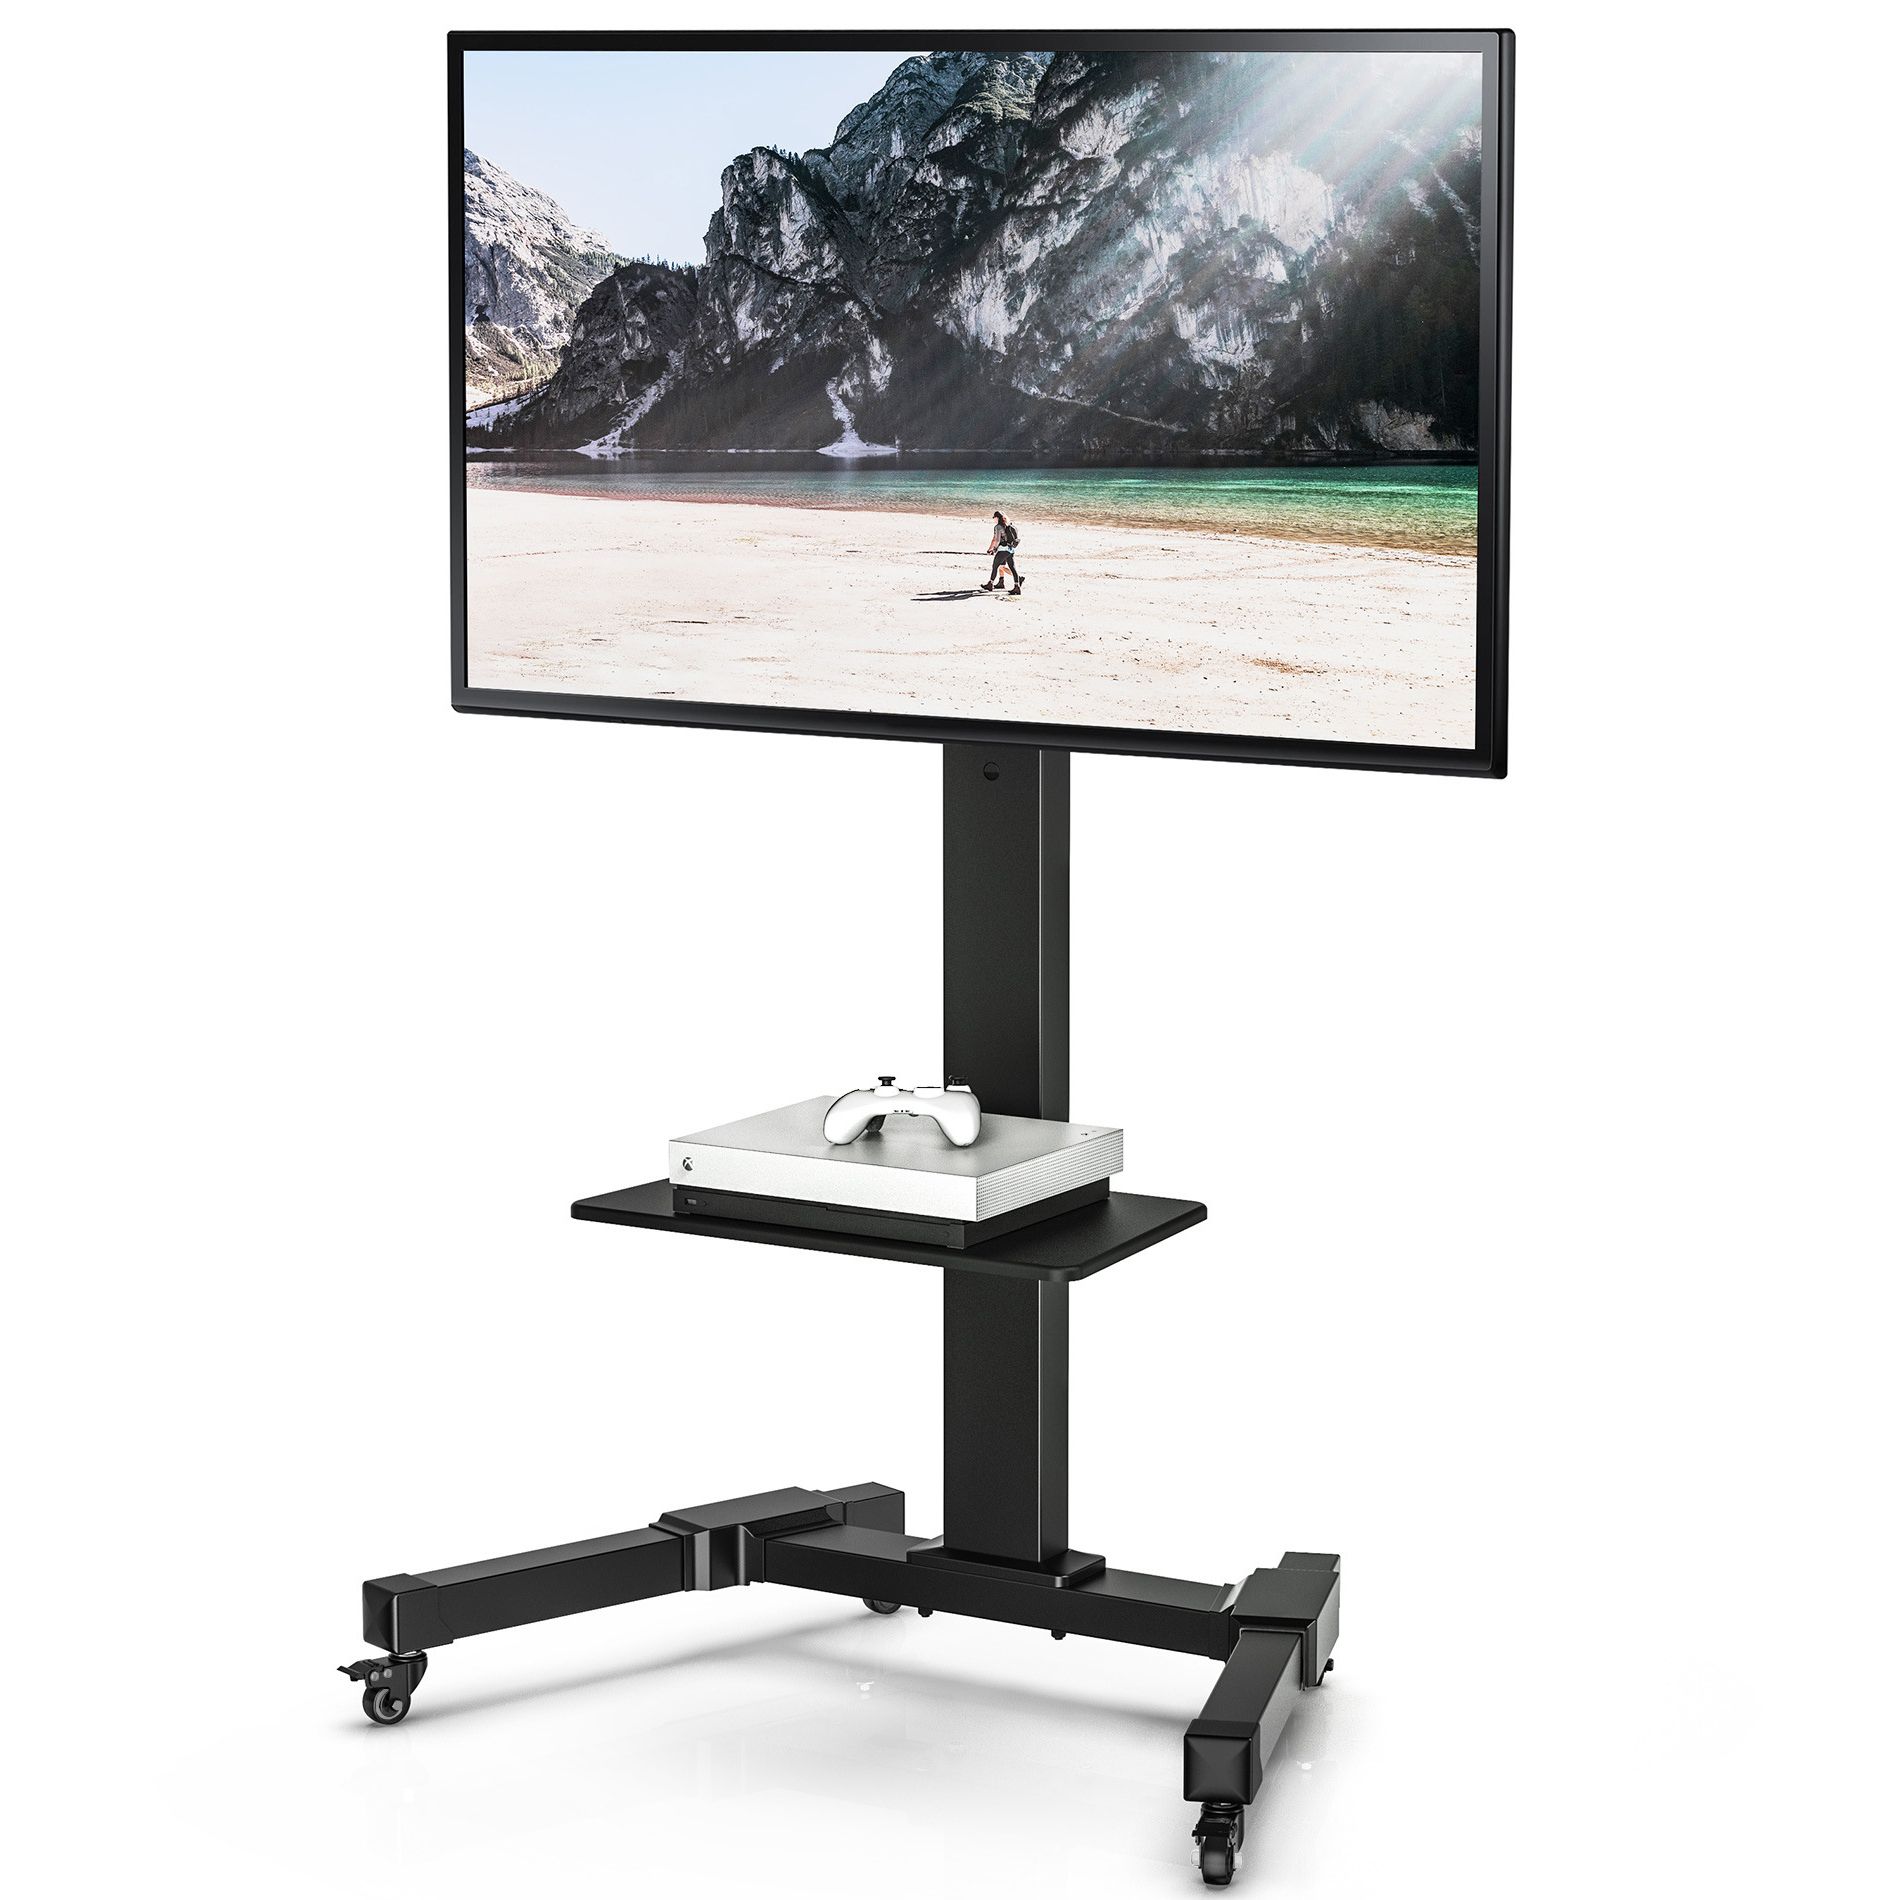 Most Current Fitueyes Mobile Swivel Tv Stand Trolley Height Adjustable With Regard To Rolling Tv Cart Mobile Tv Stands With Lockable Wheels (View 4 of 10)